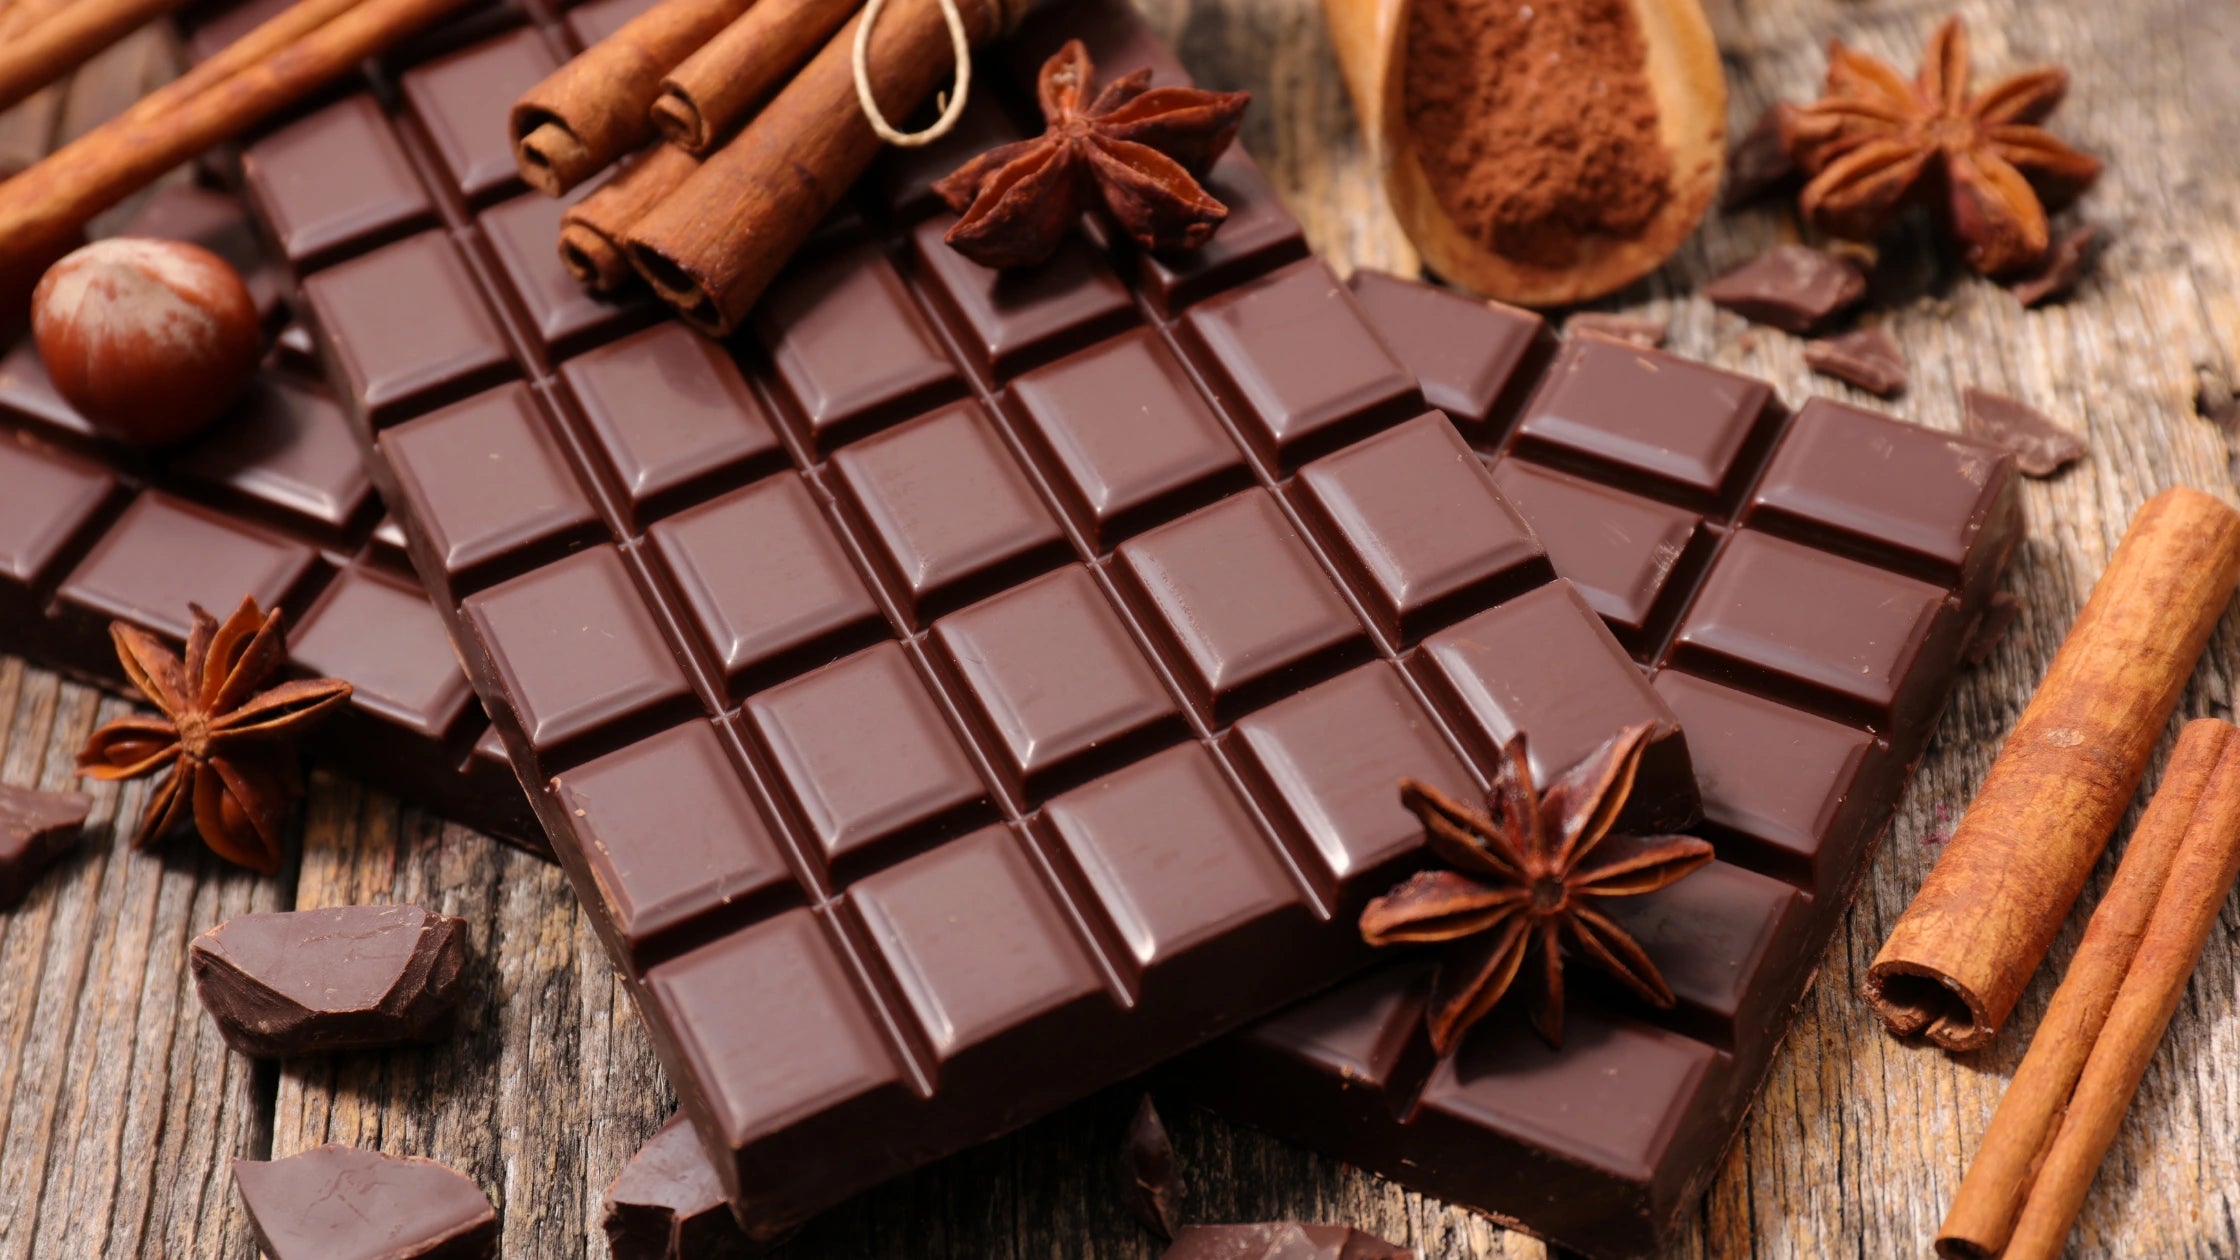 linoui - Lesser Known Facts About Chocolates